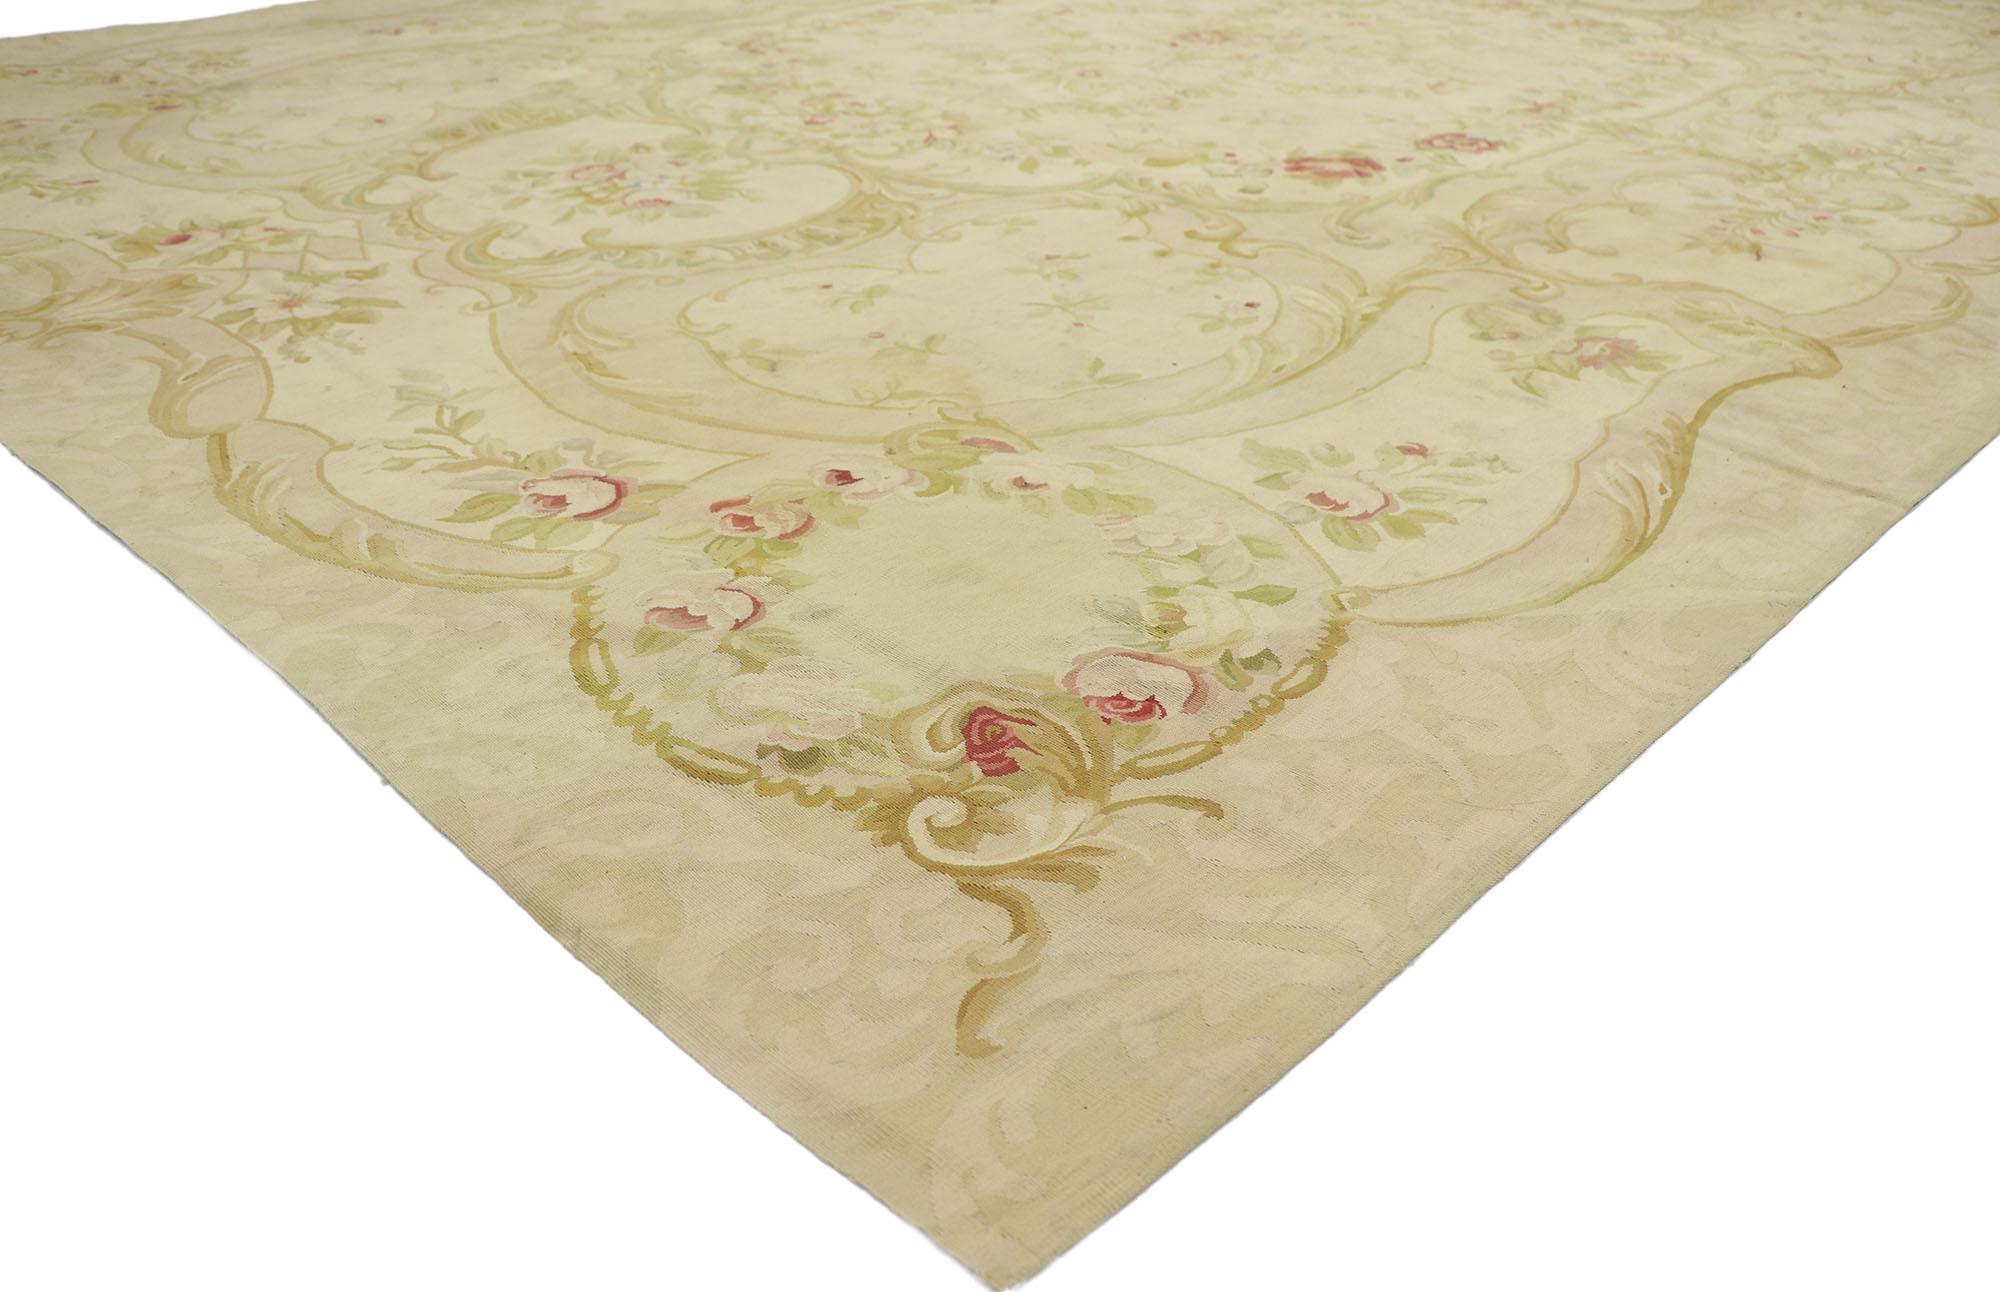 78082 Vintage French Aubusson Rug with Romantic Rococo Style 09'10 x 14'04. Flourishing in technique and trend from the middle of the 17th century for nearly two hundred years, until the early 20th century, this hand-woven wool vintage French